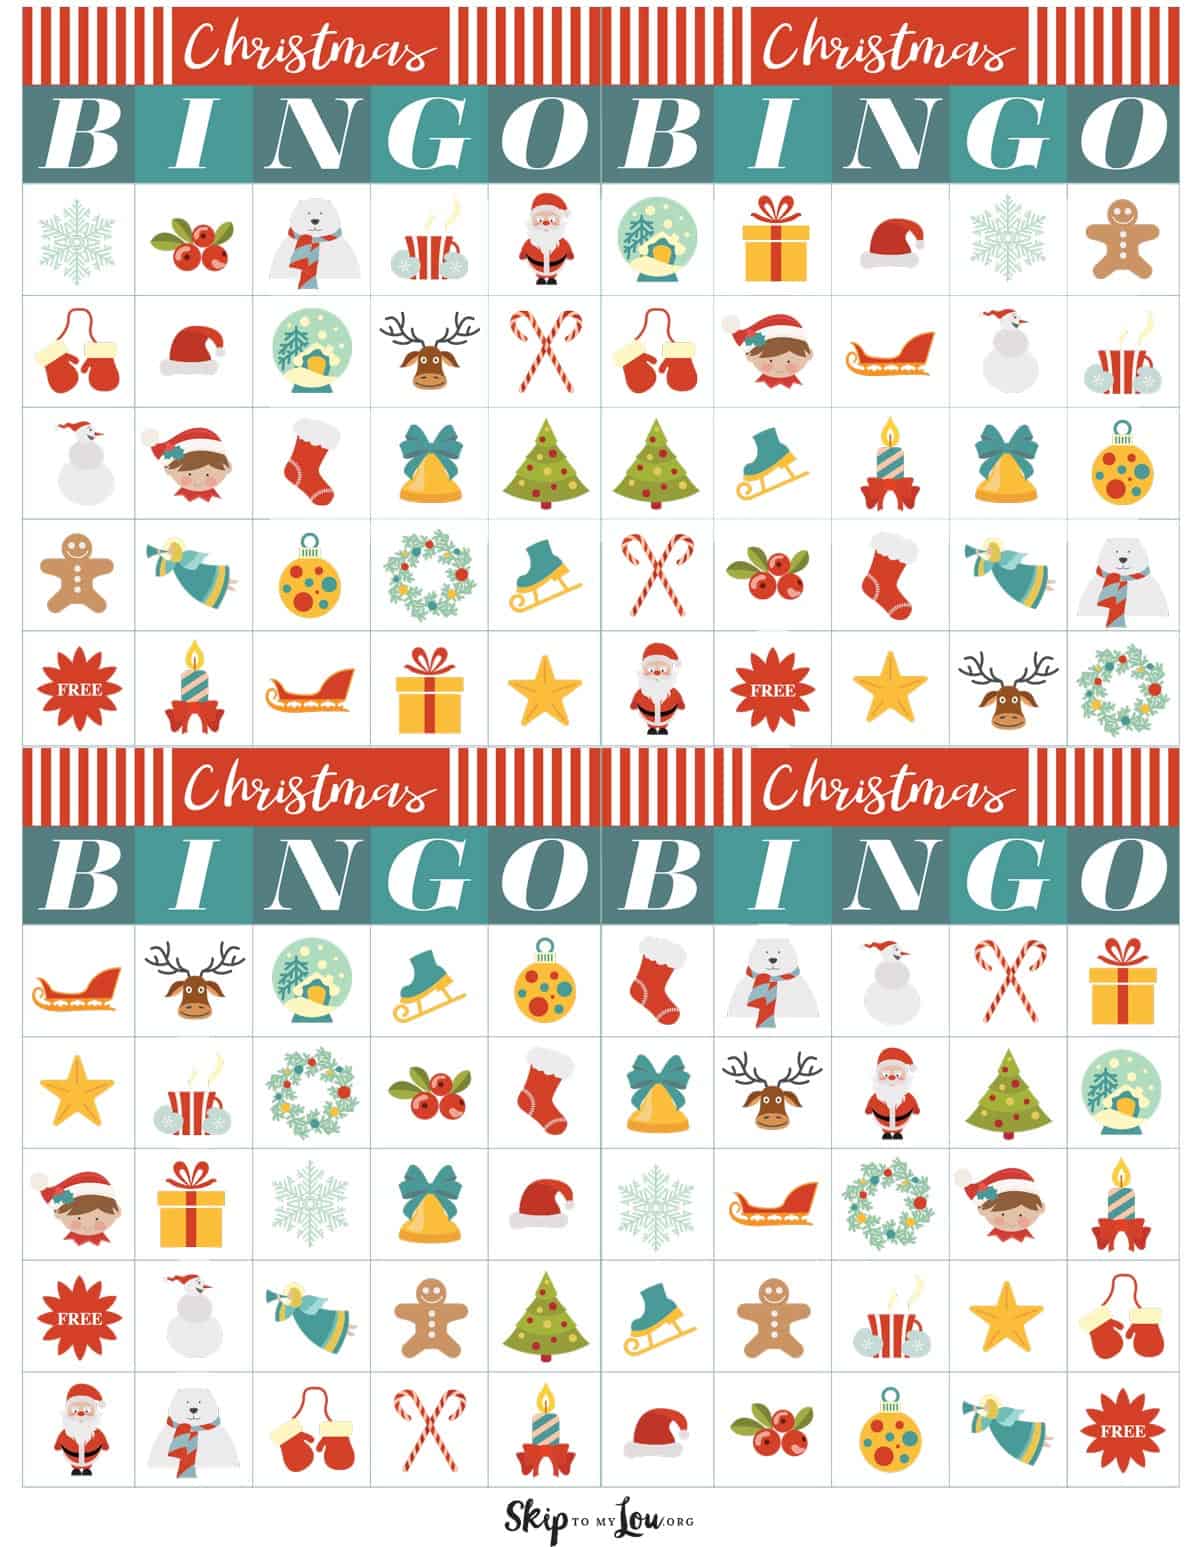 4 red and green Christmas Bingo cards with Christmas pictures instead of numbers by Skip to my Lou.